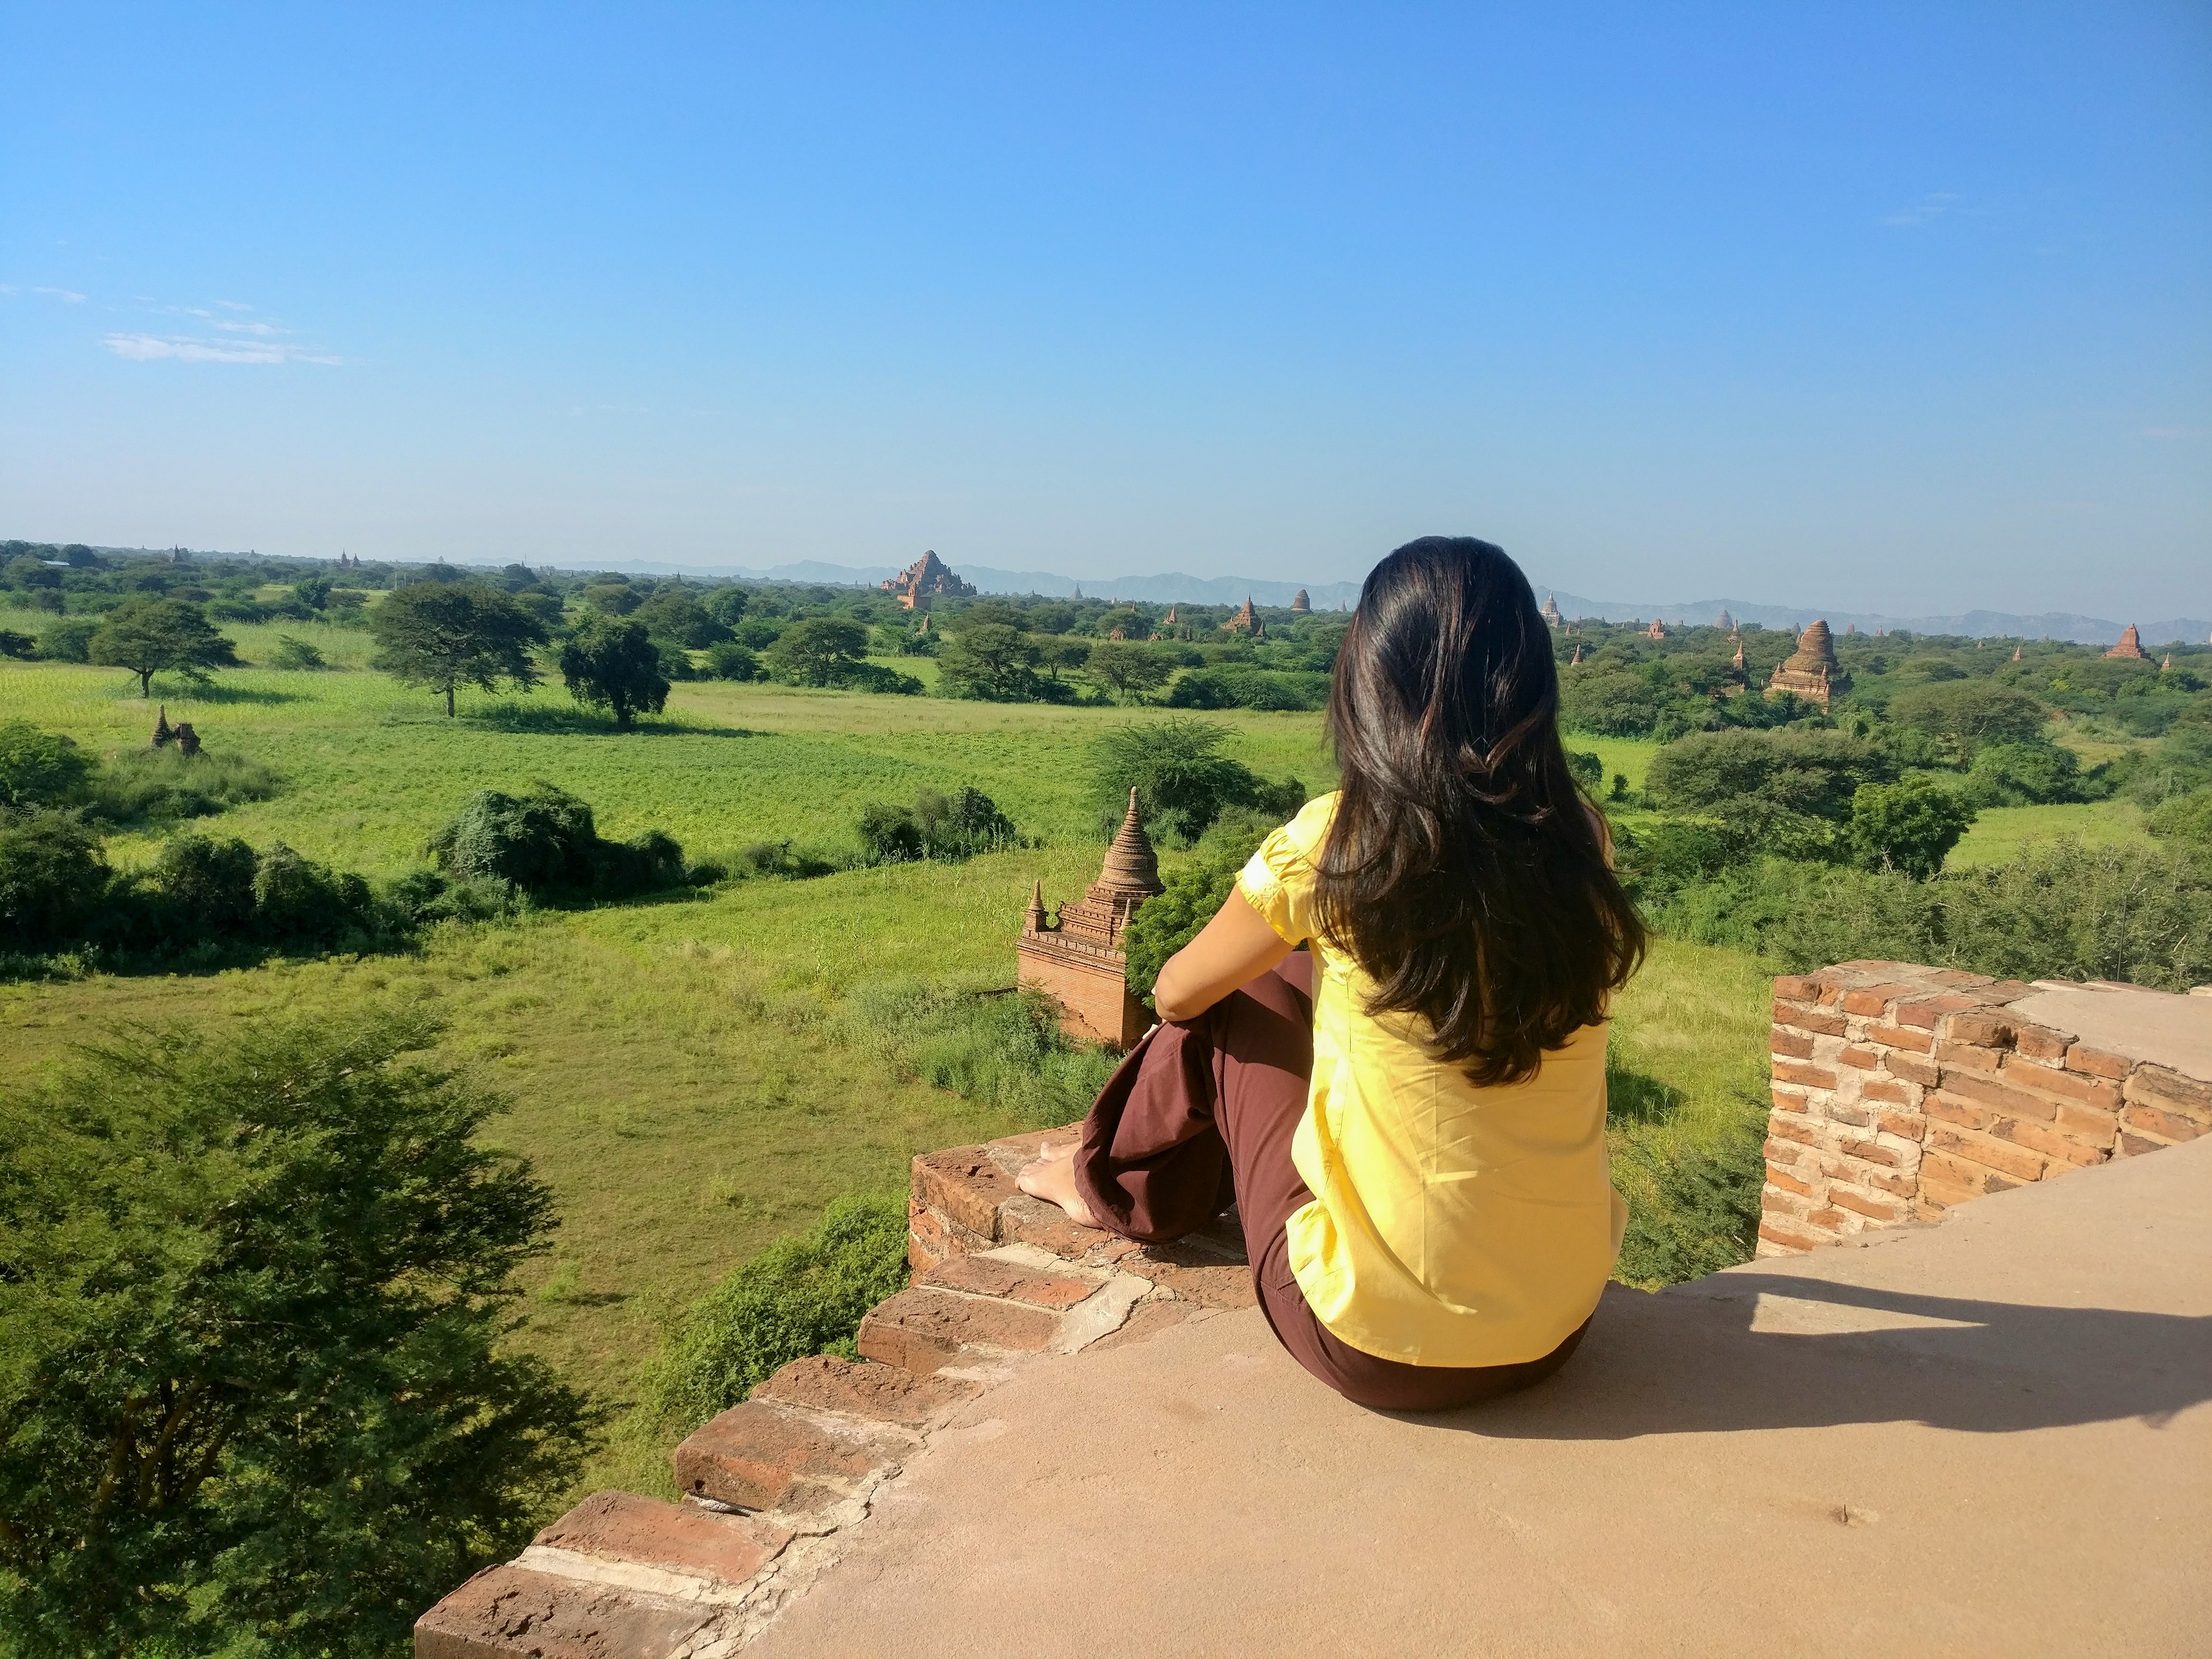 Let's Plan a Trip to Myanmar: Land of Spirit and Golden Spires